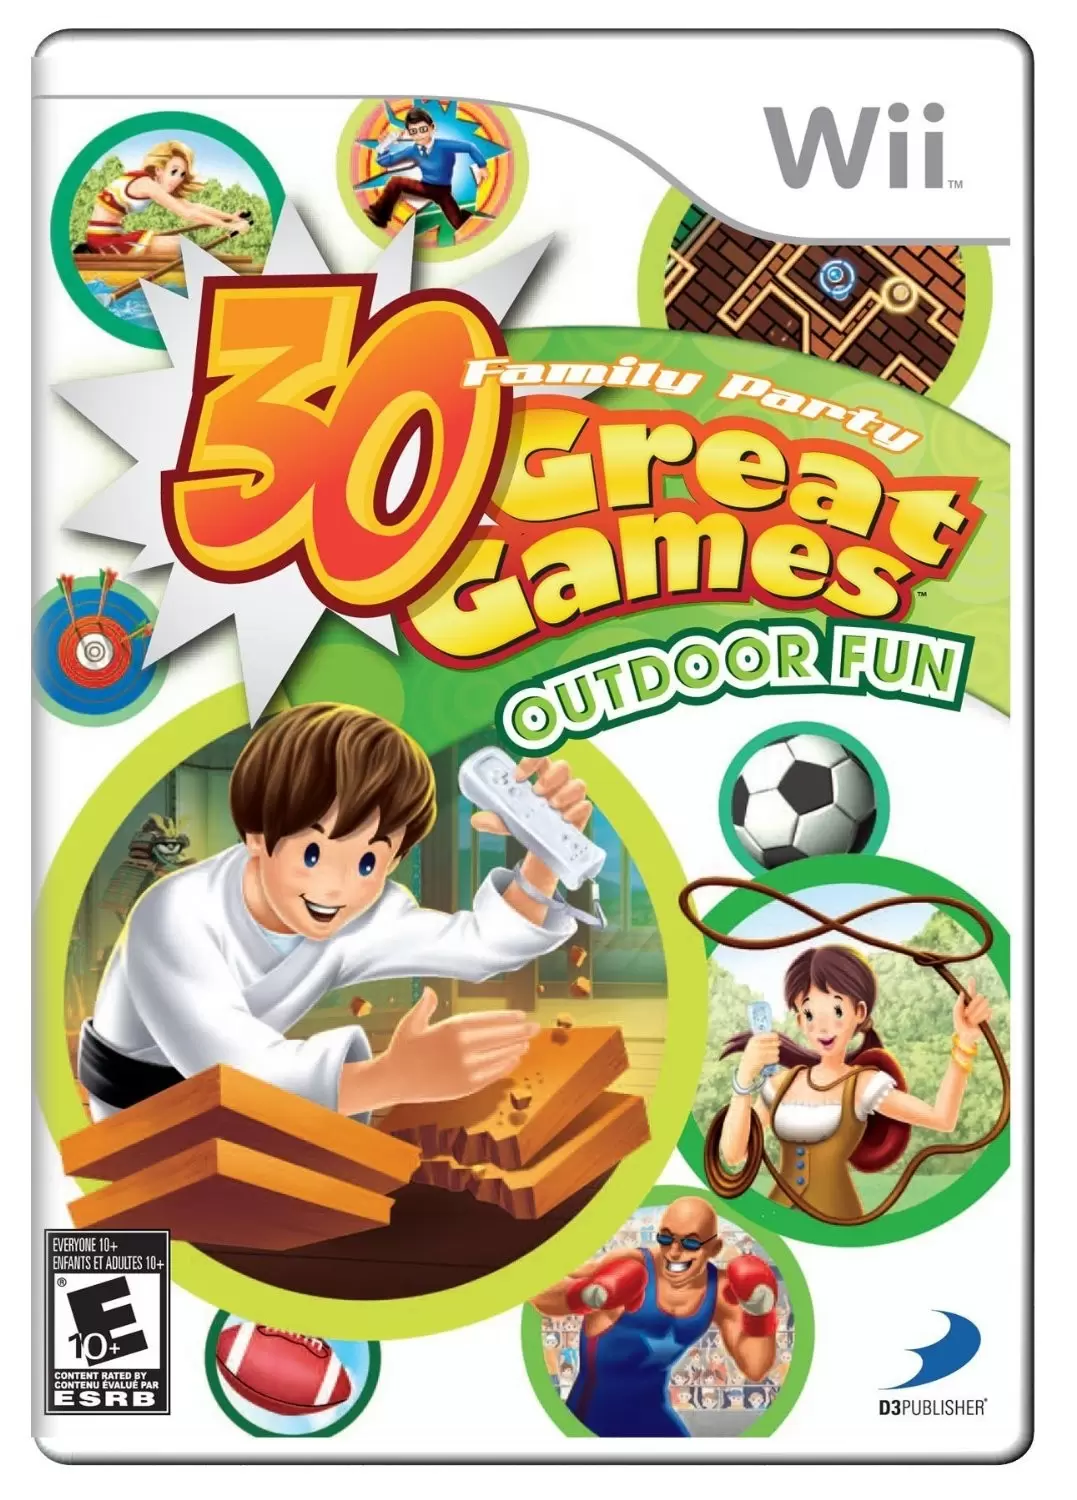 Nintendo Wii Games - Family Party: 30 Great Games Outdoor Fun